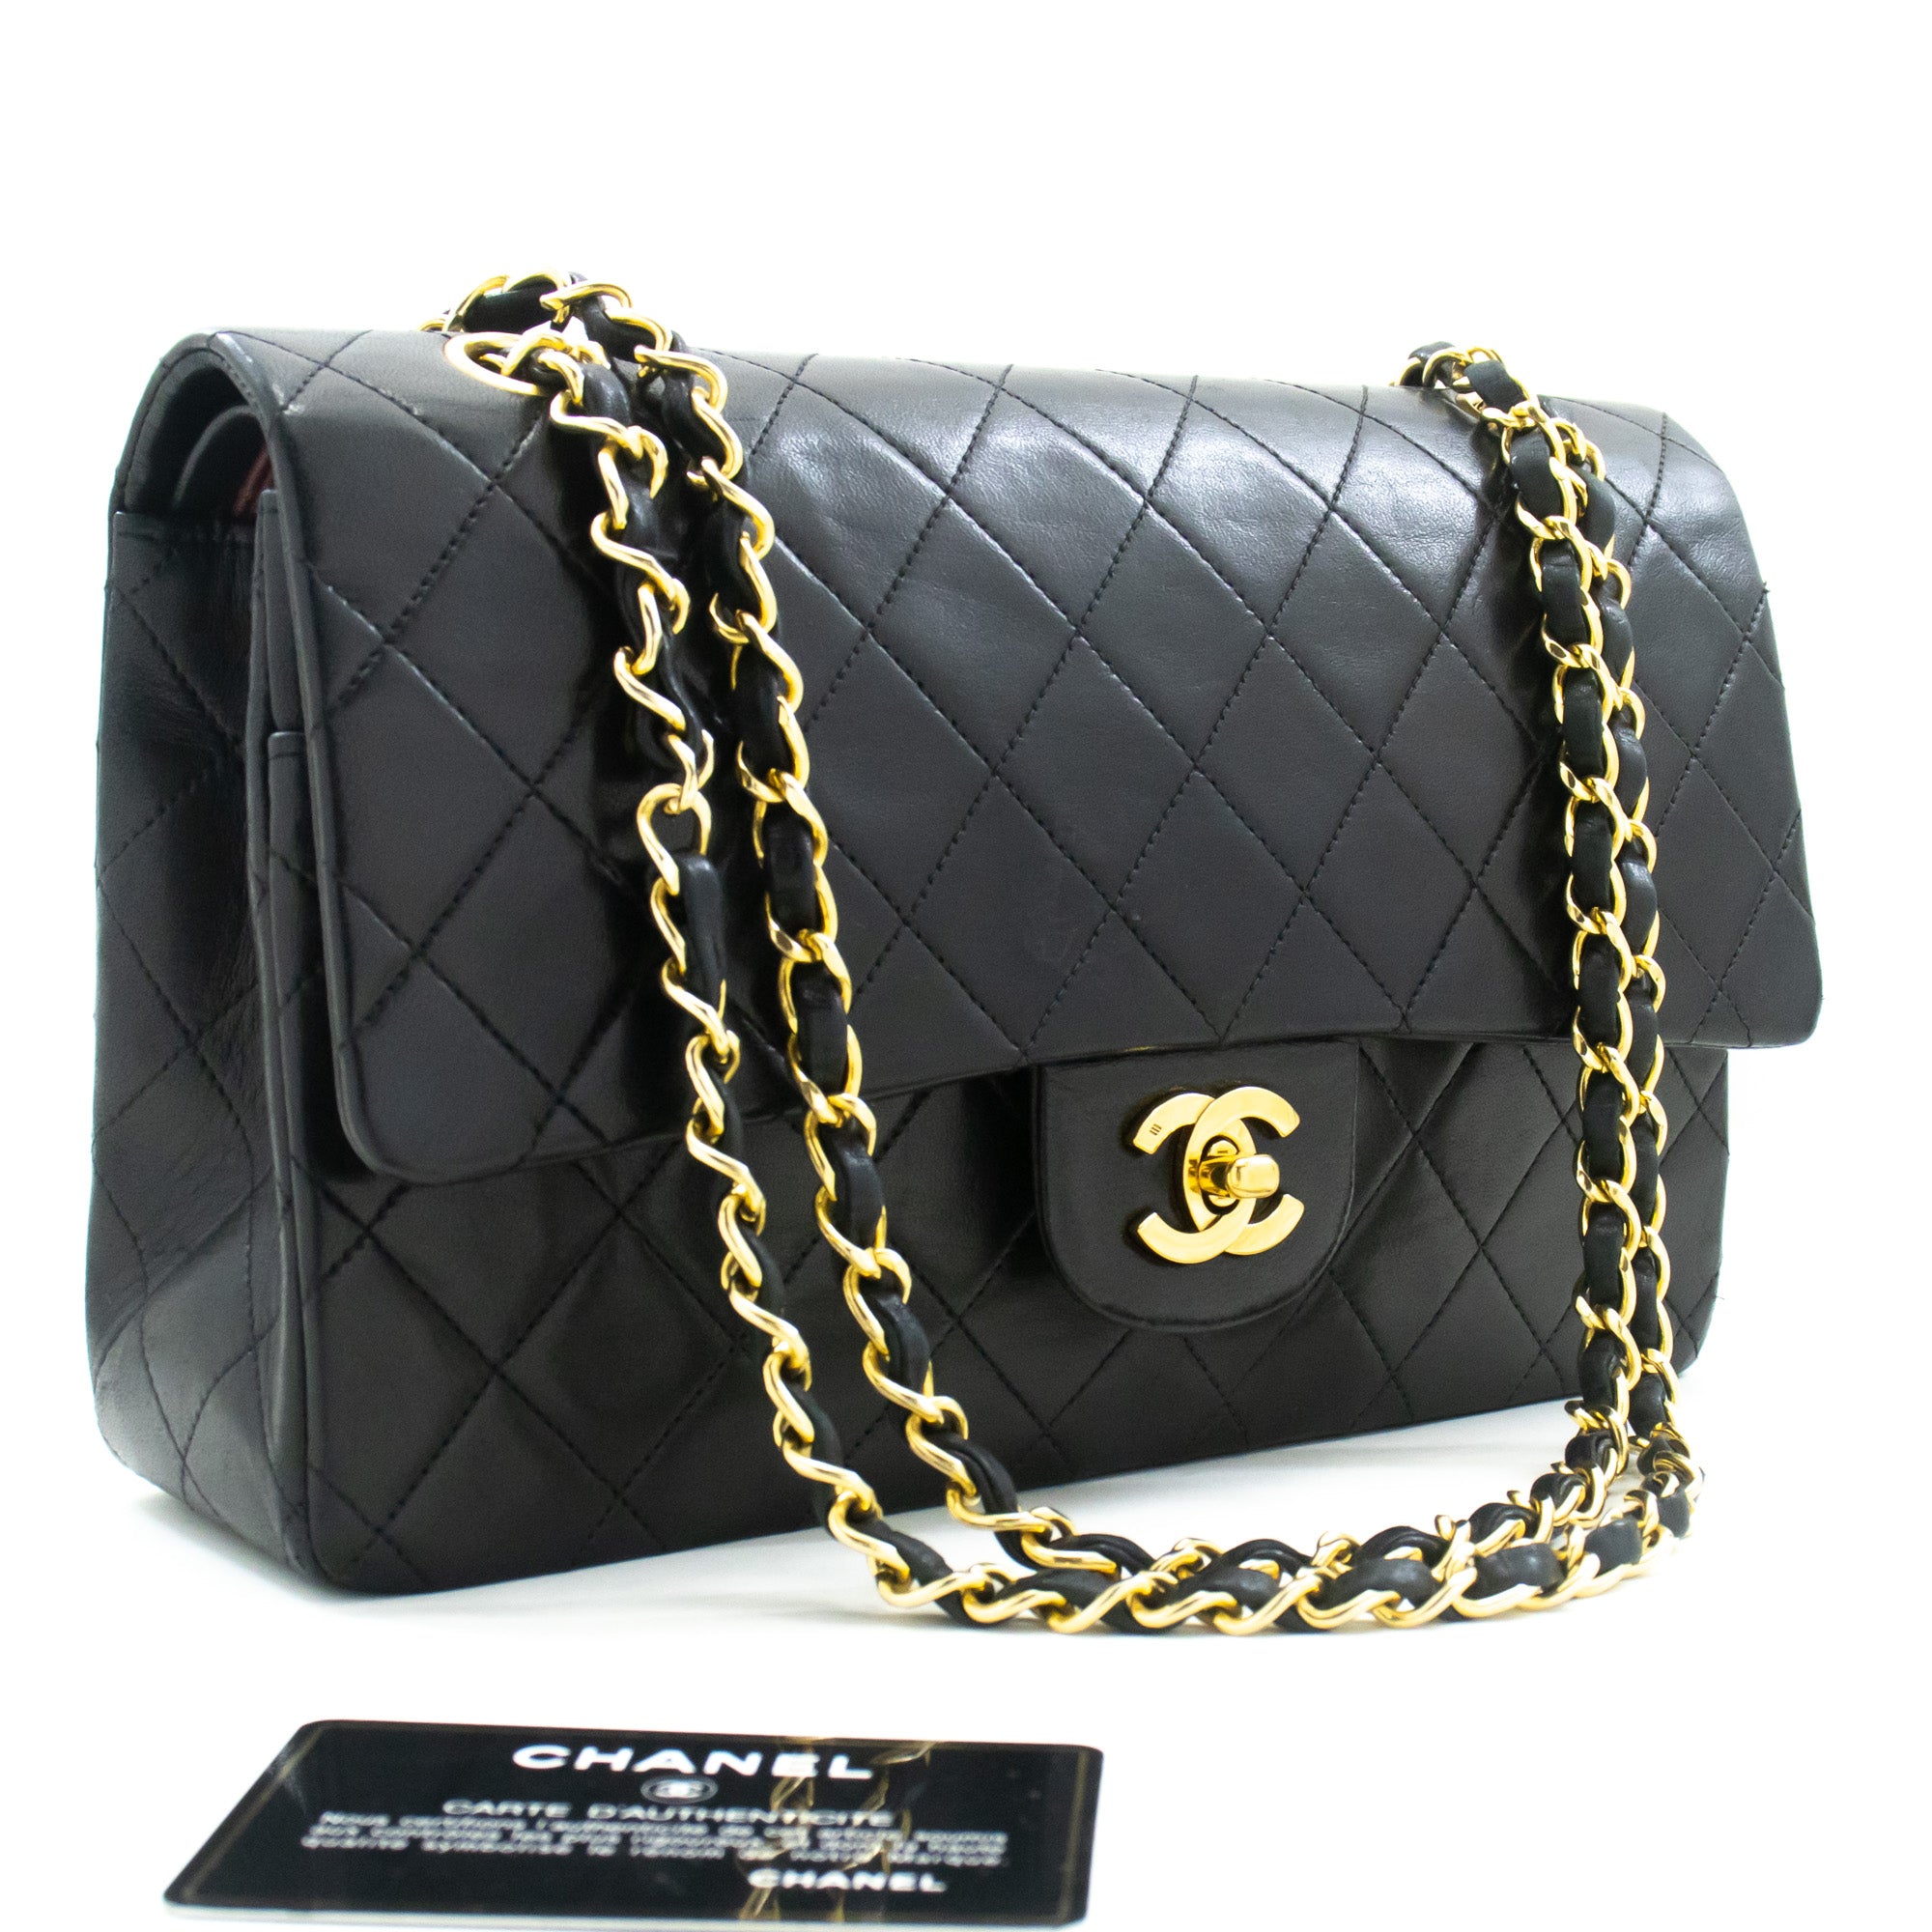 Chanel Classic Flap or the Boy Bag